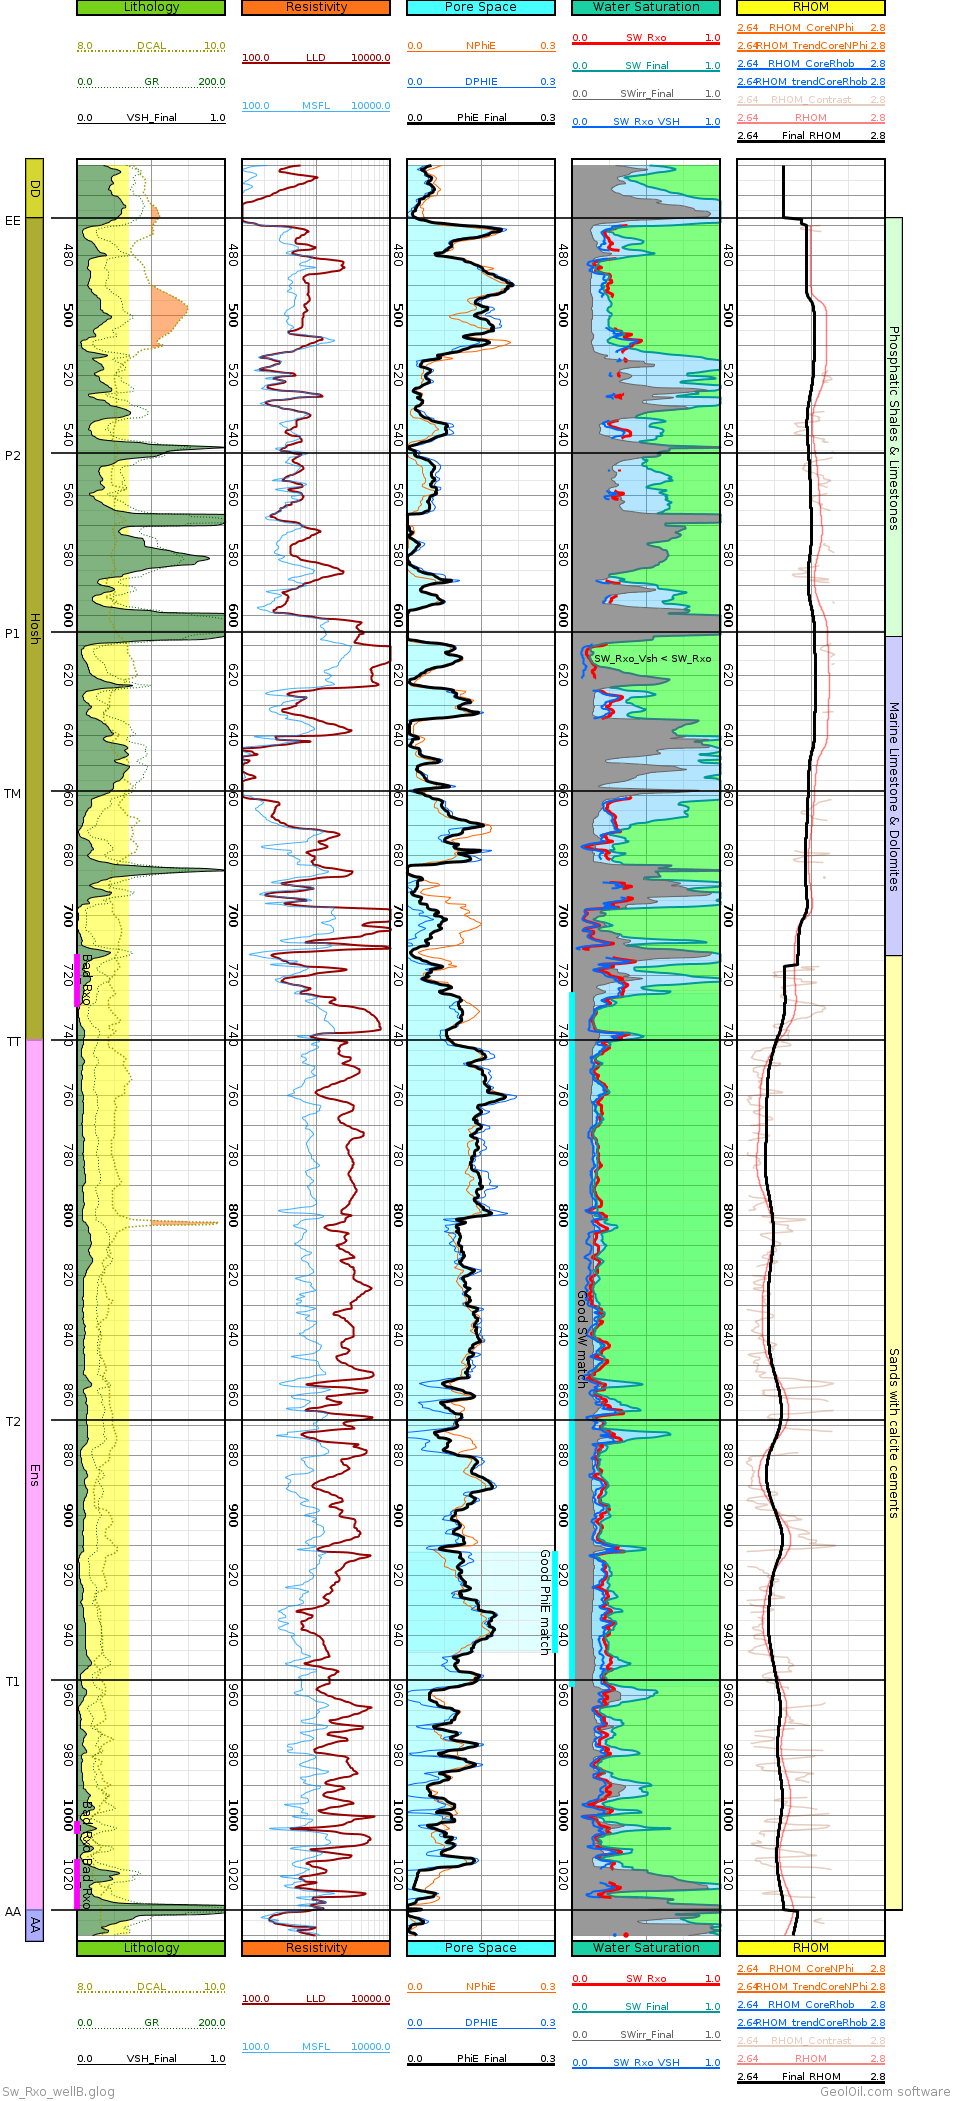 GeolOil software log plot of water saturation computed through SW ratio